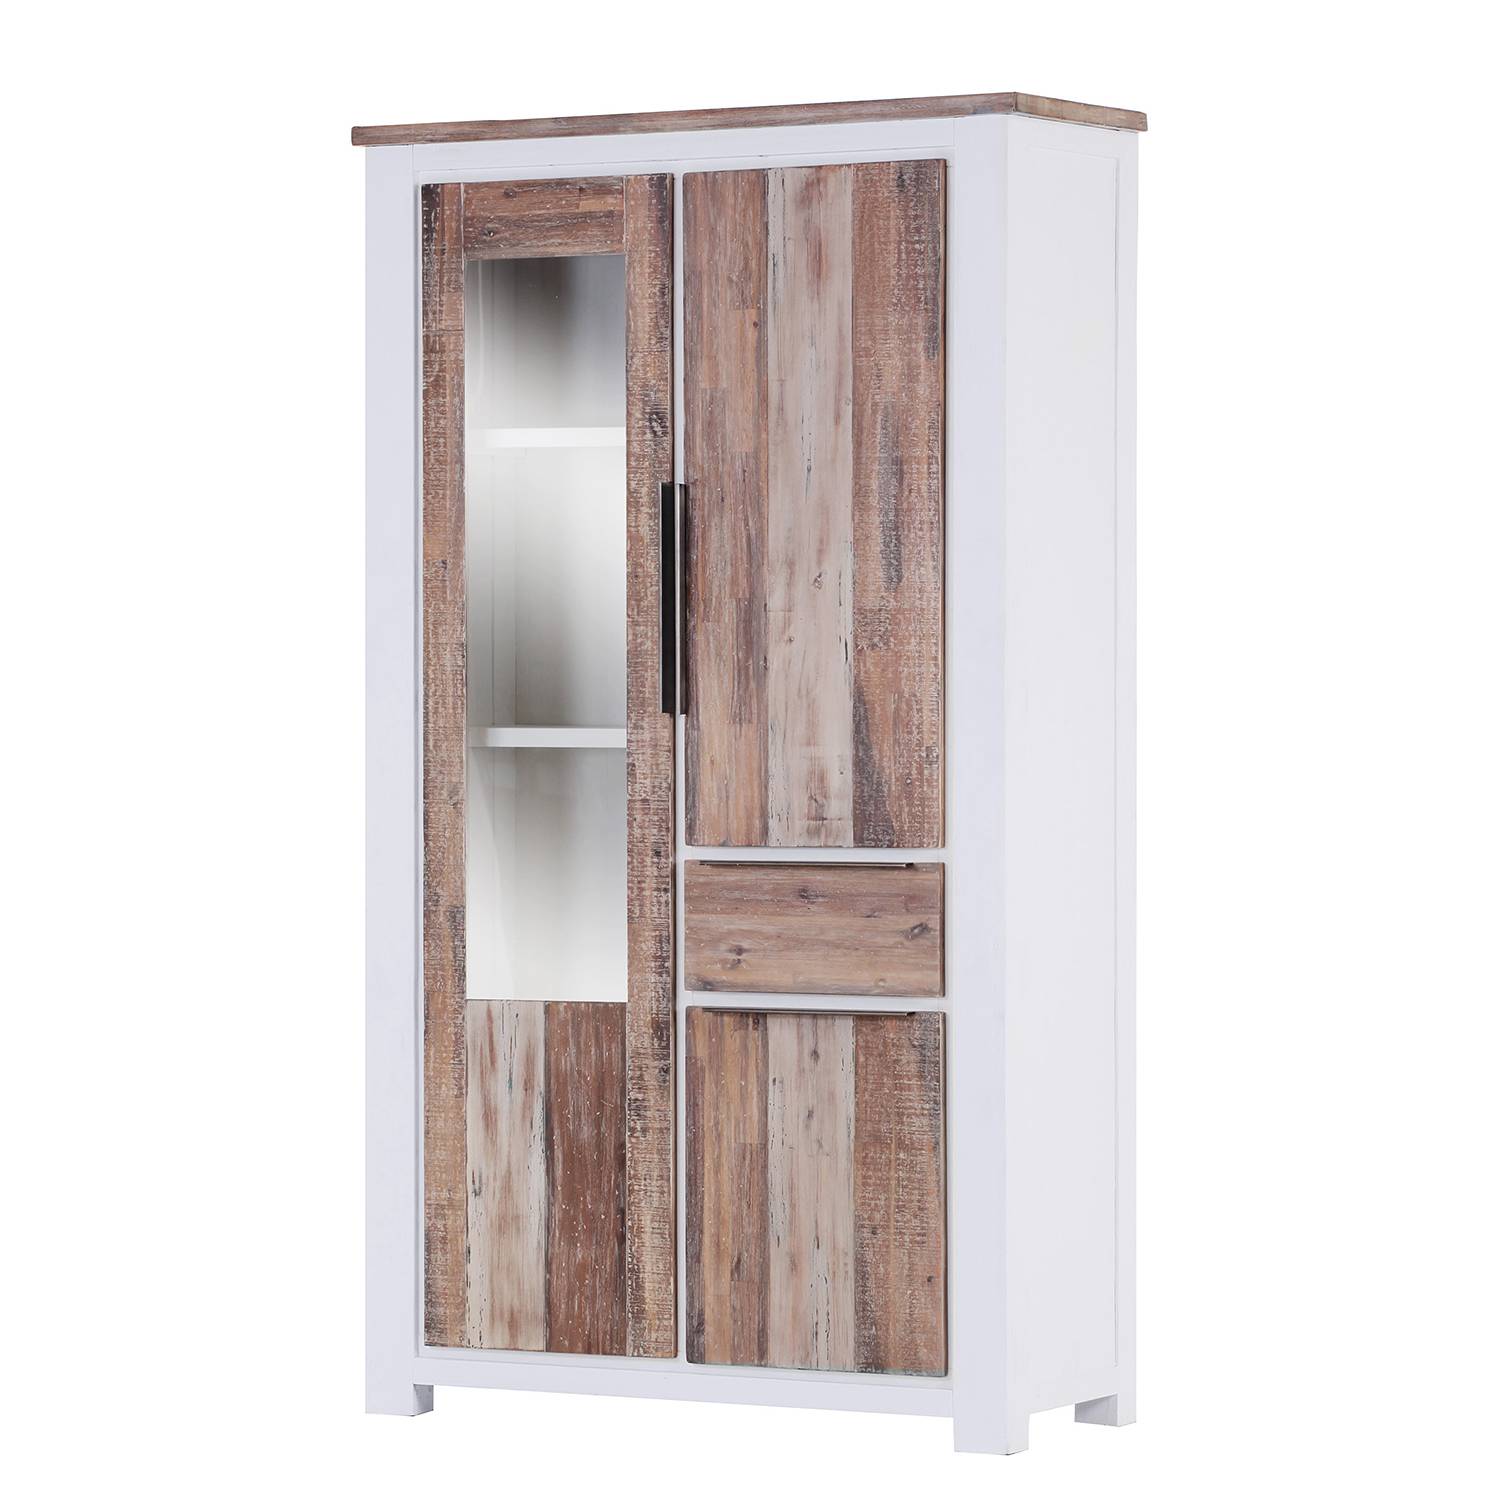 Image of Armoire Doral 000000001000040149